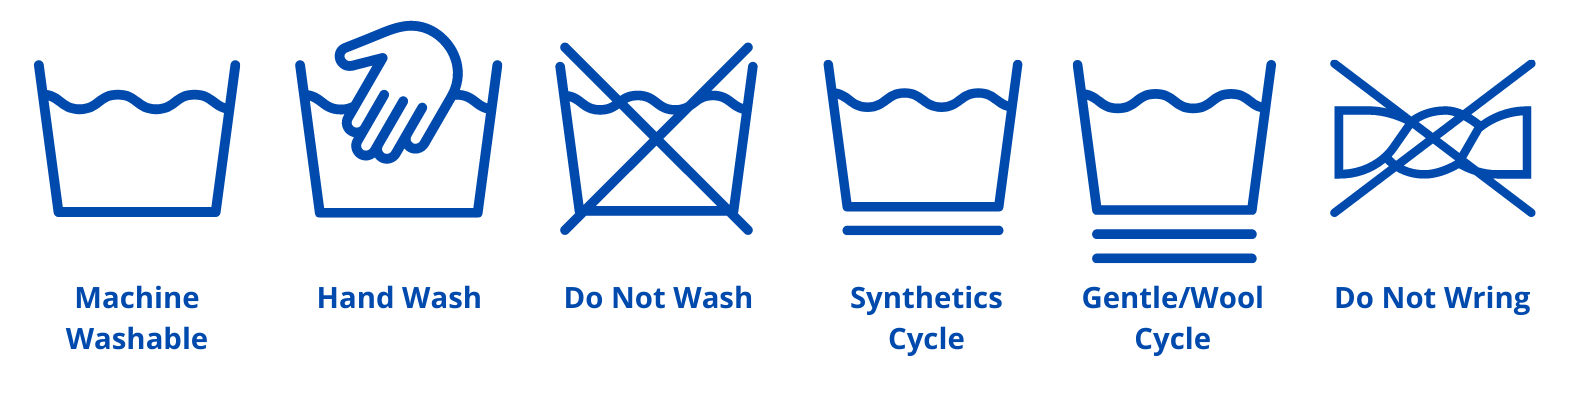 Common washing symbols and their meaning